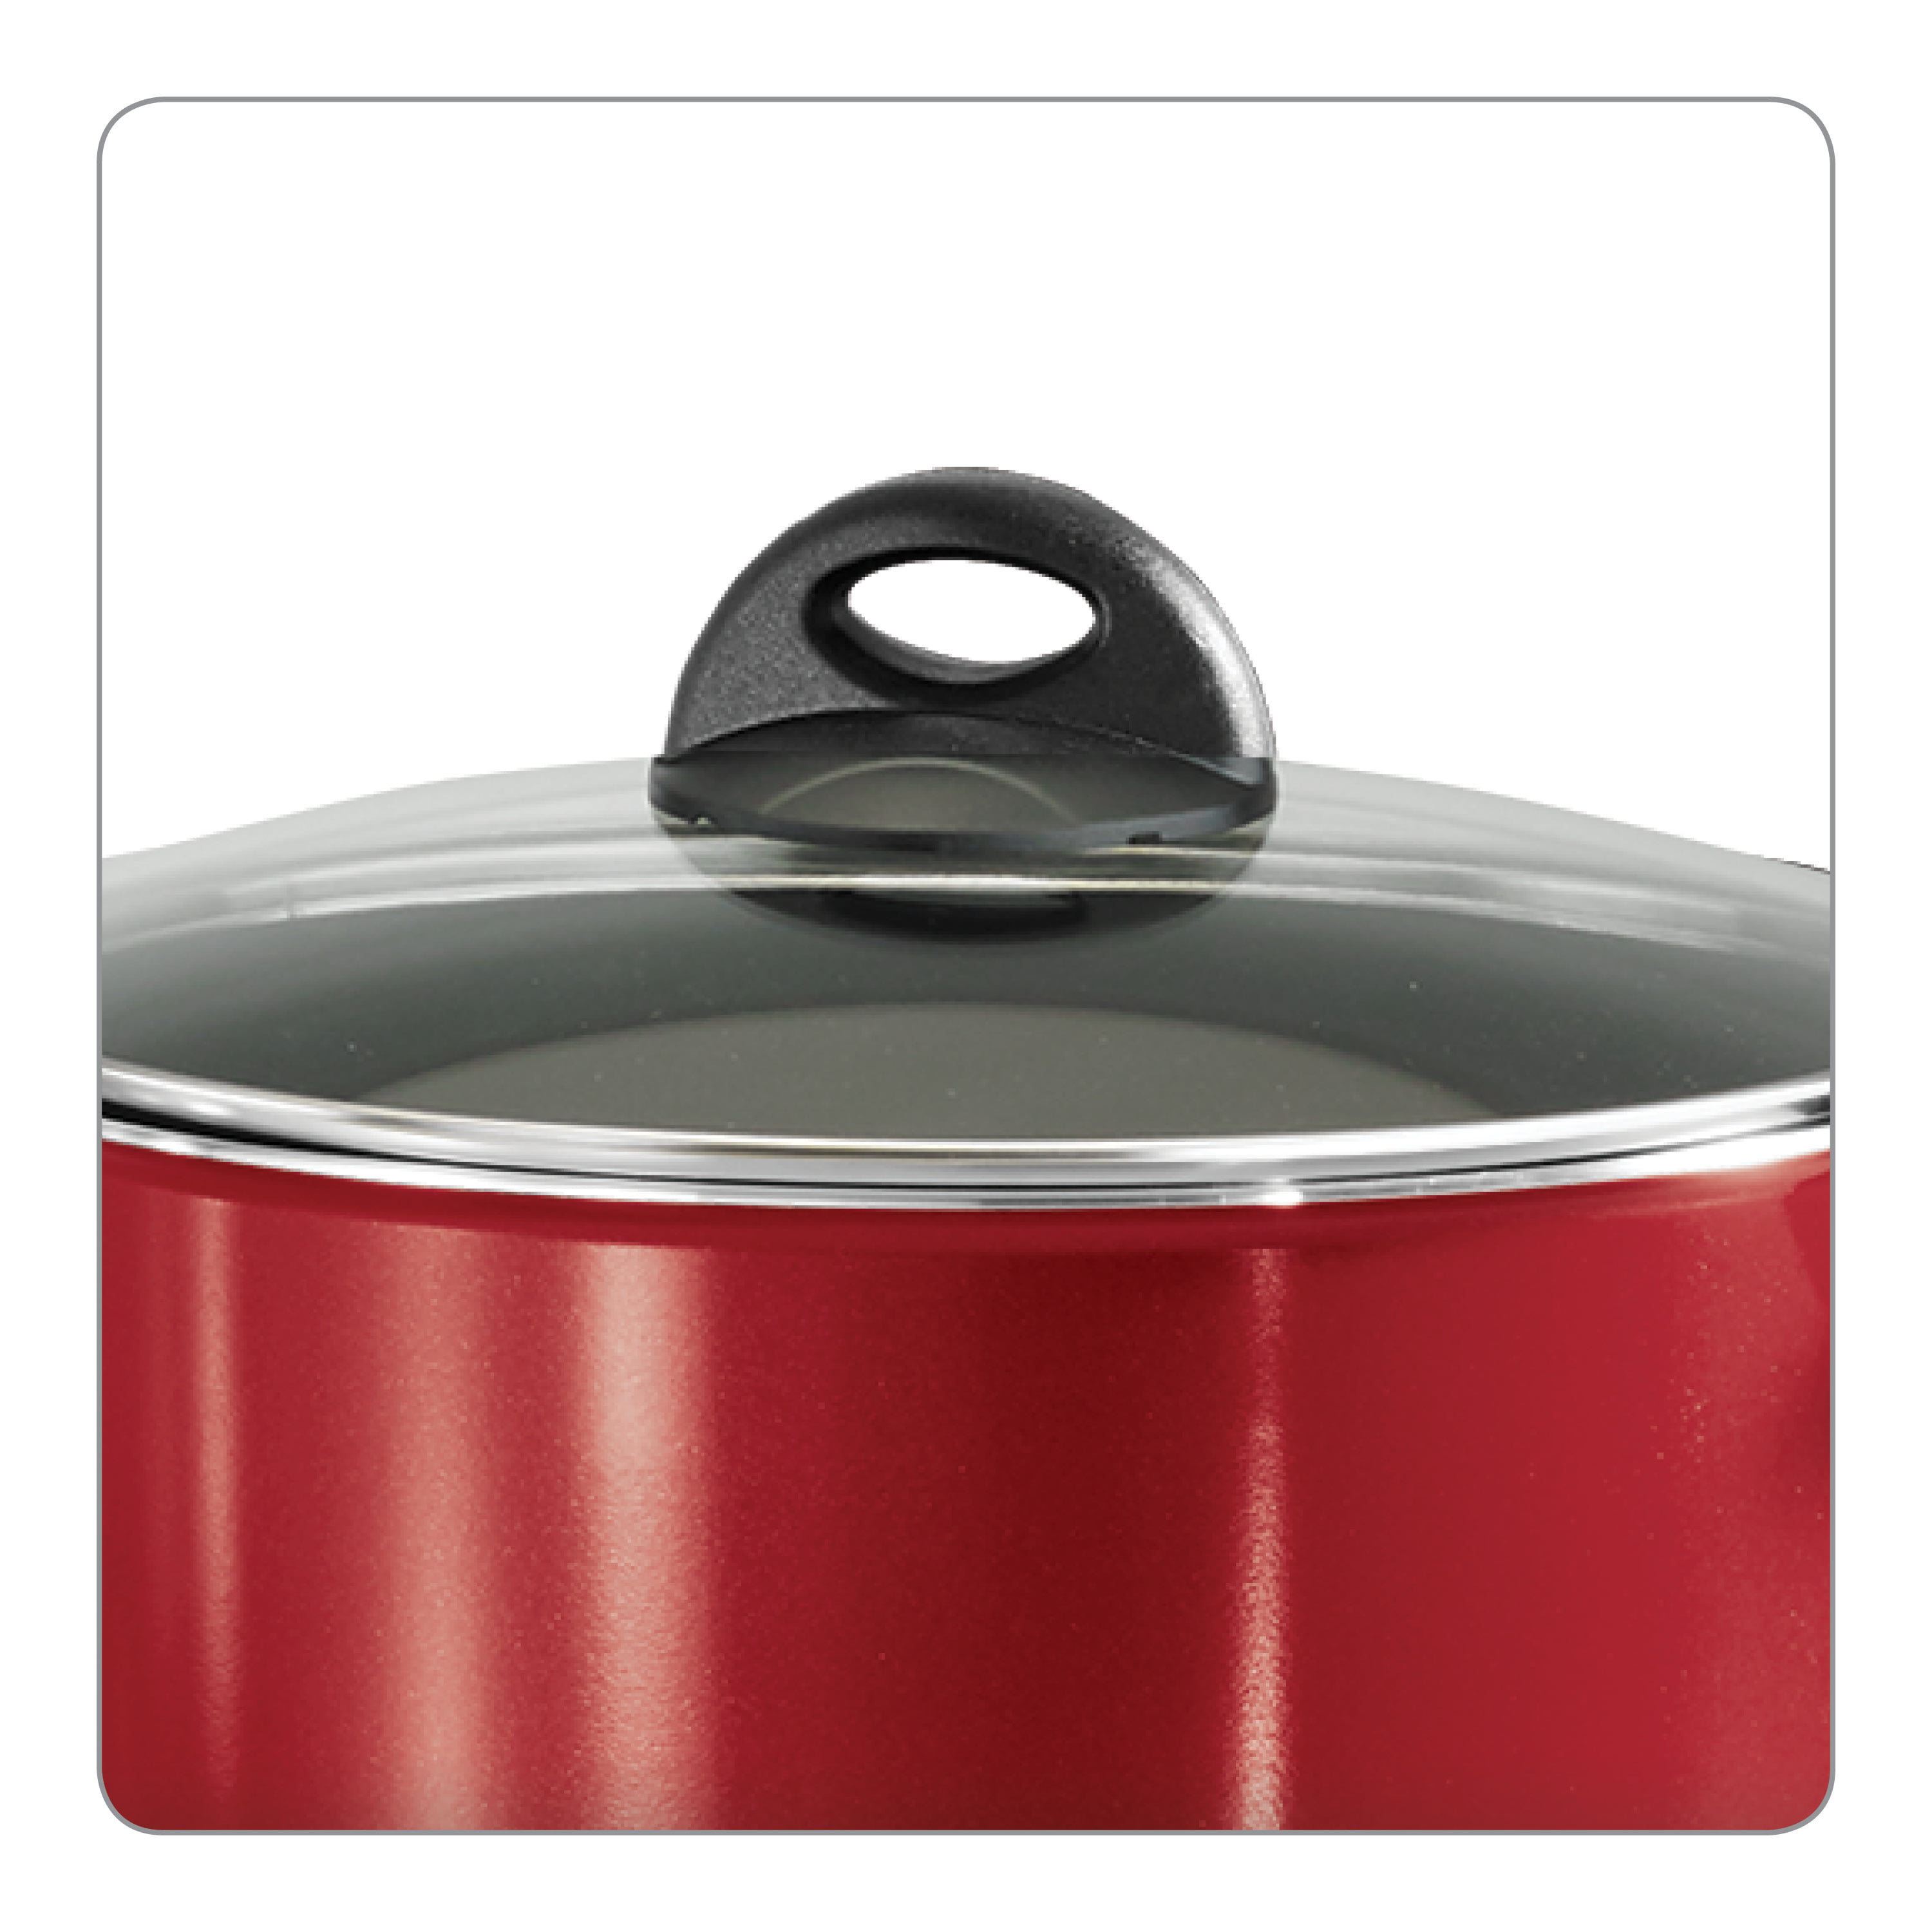 Tramontina EveryDay 11 in Aluminum Nonstick Square Grill Pan – Red 